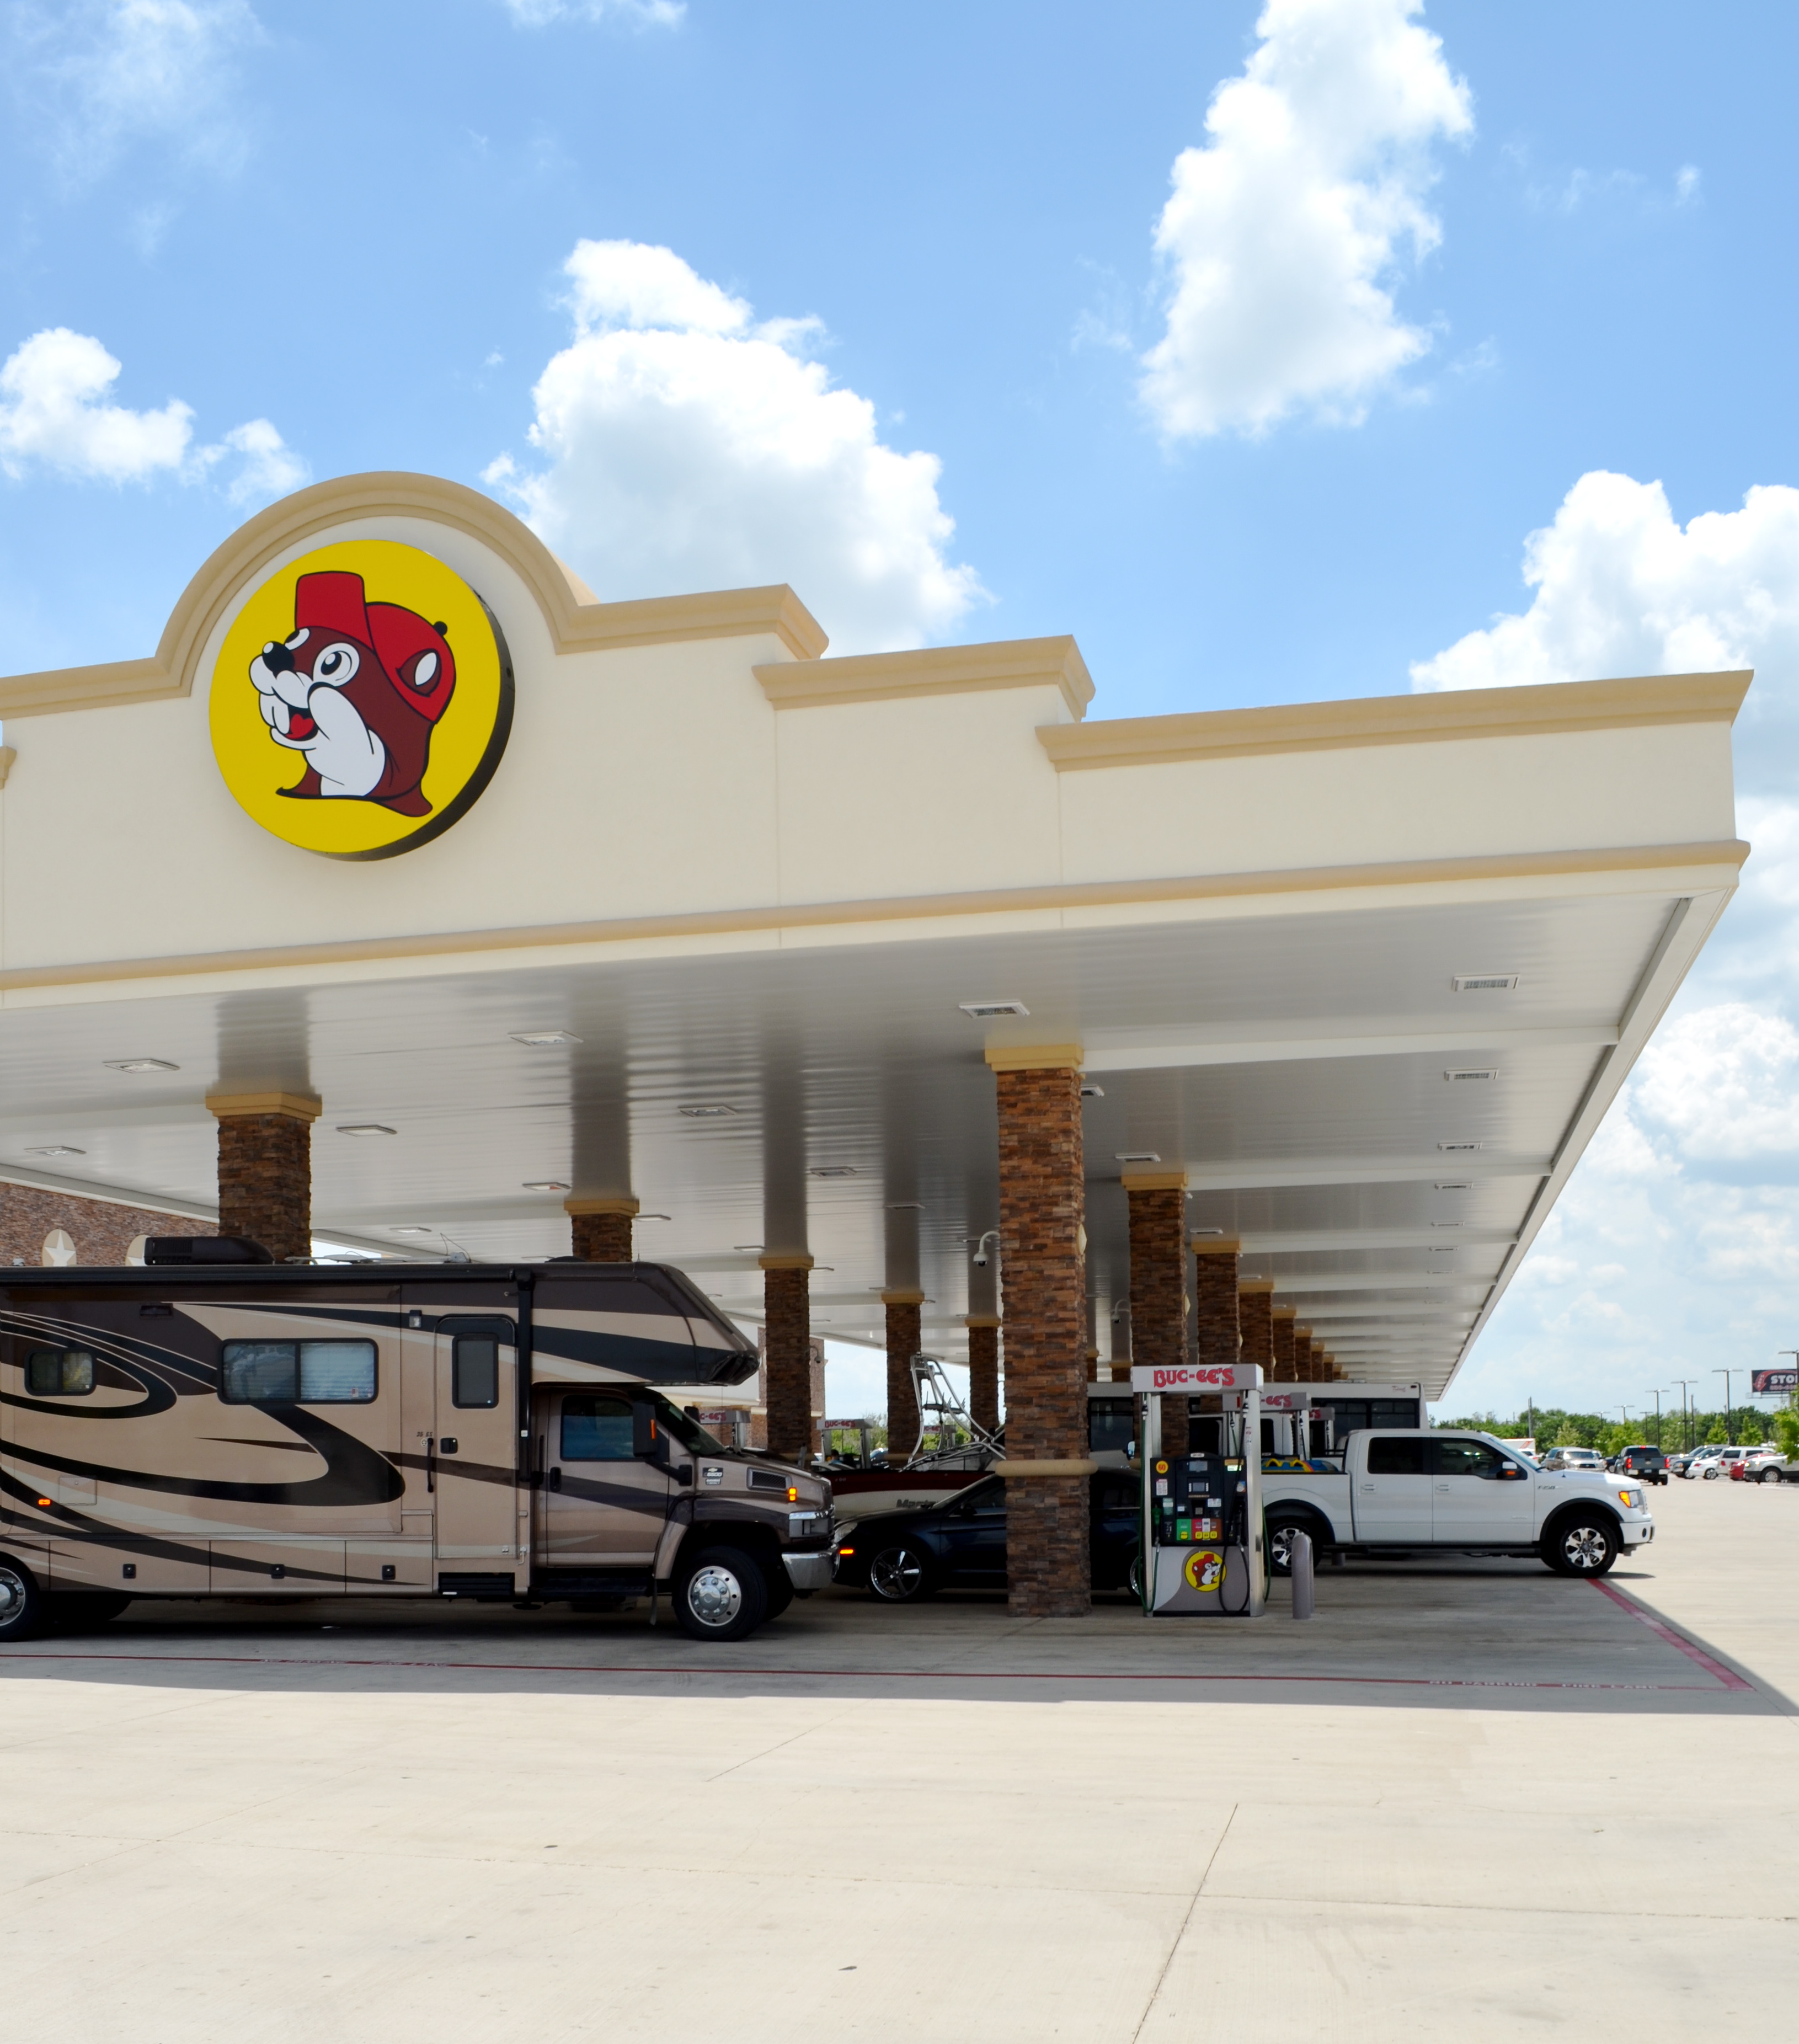 What is Bucees